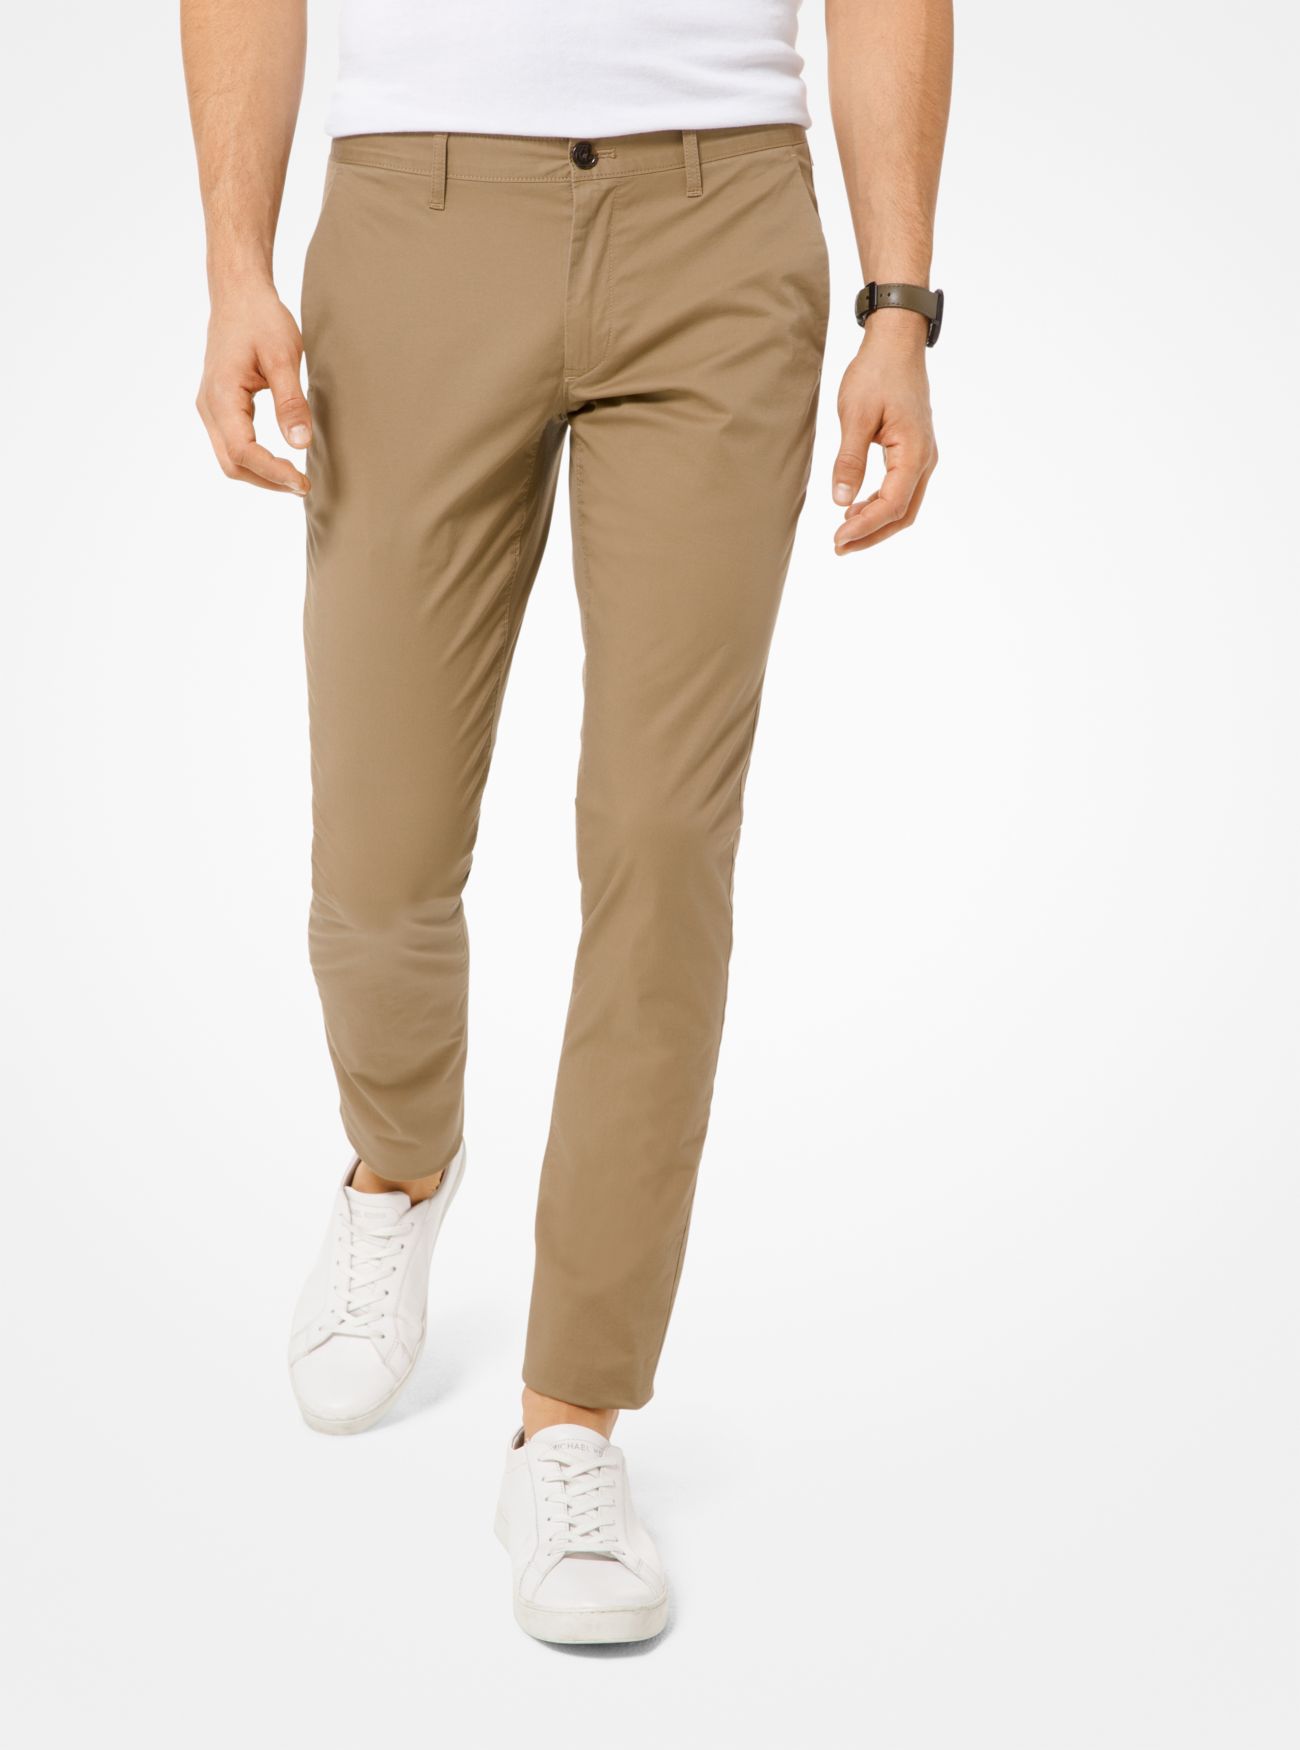 MK Skinny-Fit Stretch-Cotton Chino Trousers - Natural - Michael Kors